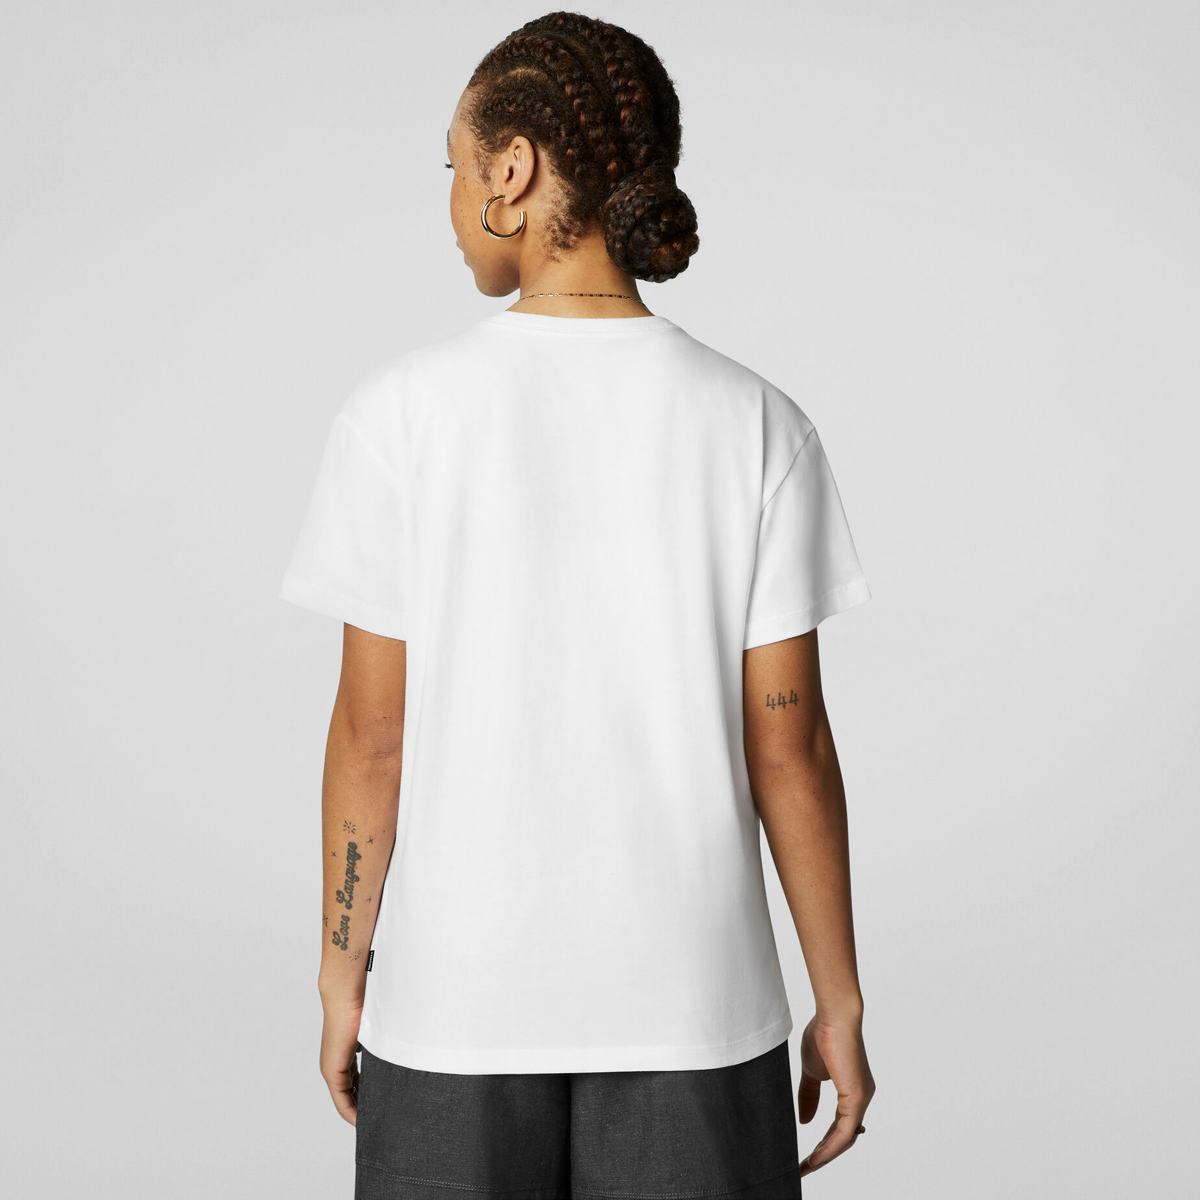 Футболка Converse CHUCK INSPIRED SNEAKER RELAXED TEE WHITE